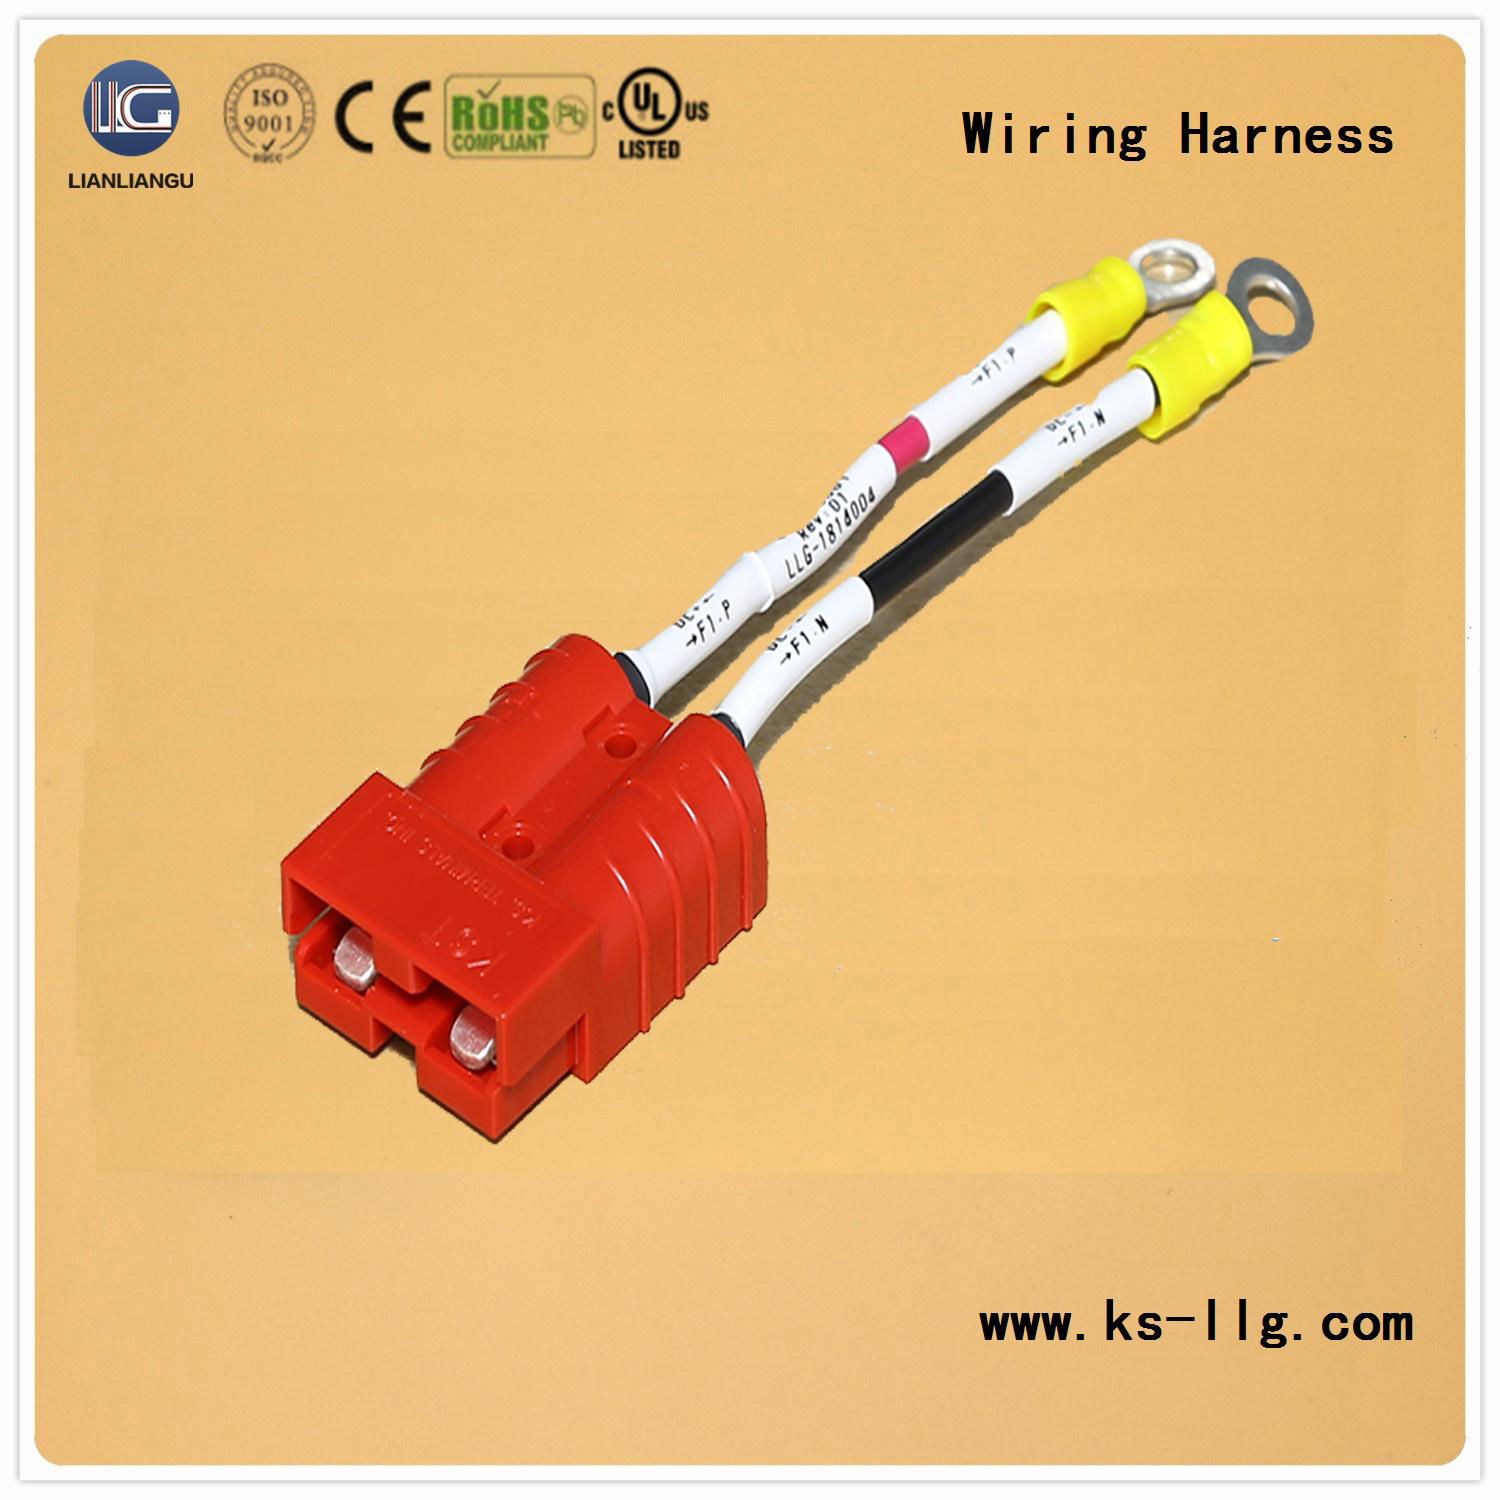 Coaxial Cable Wholesale Price for Network, Security Monitoring, Control Systems. 2